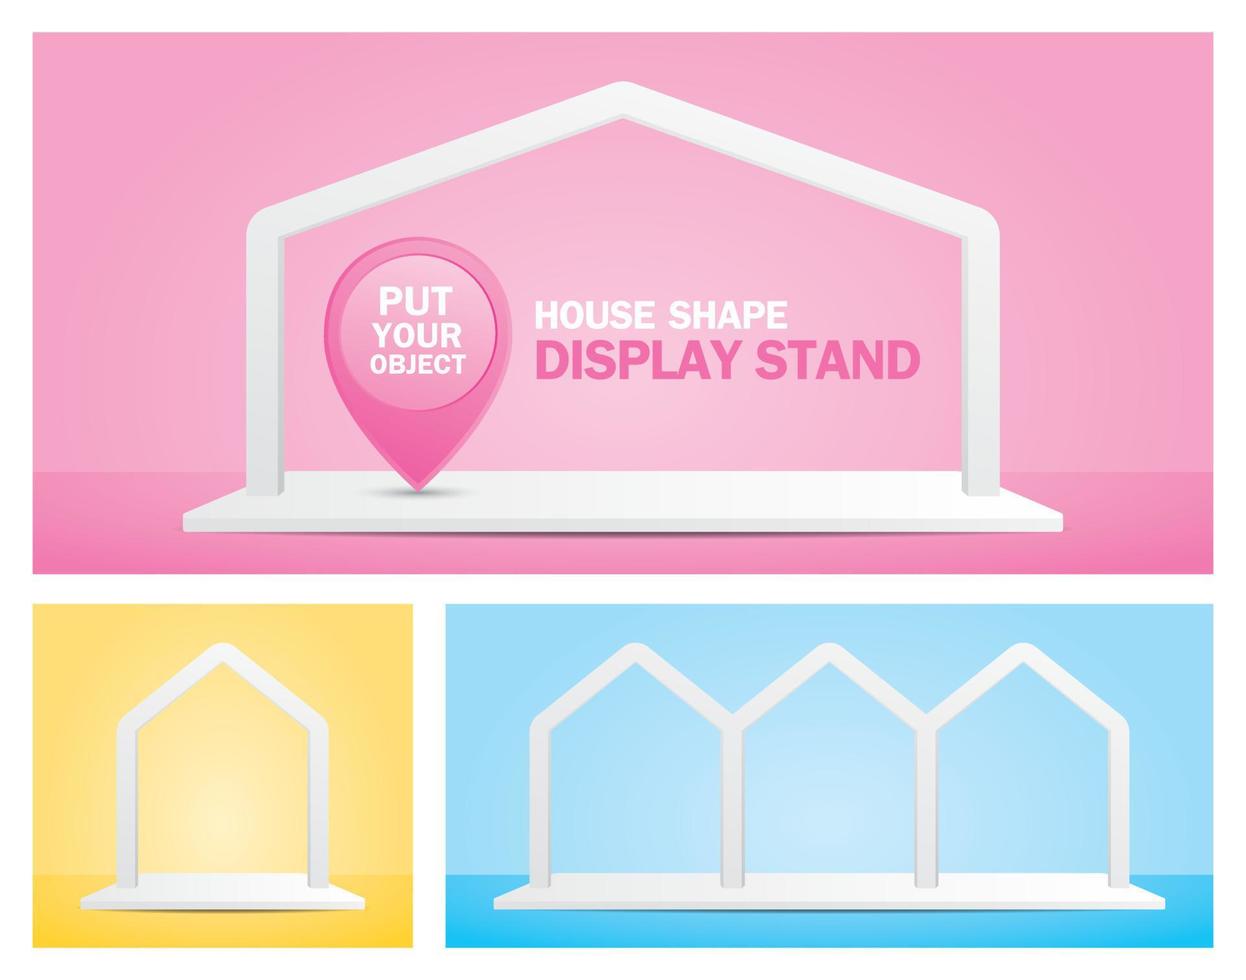 Minimal white house shape display stand 3d illustration vector set on sweet pastel scene for putting your object